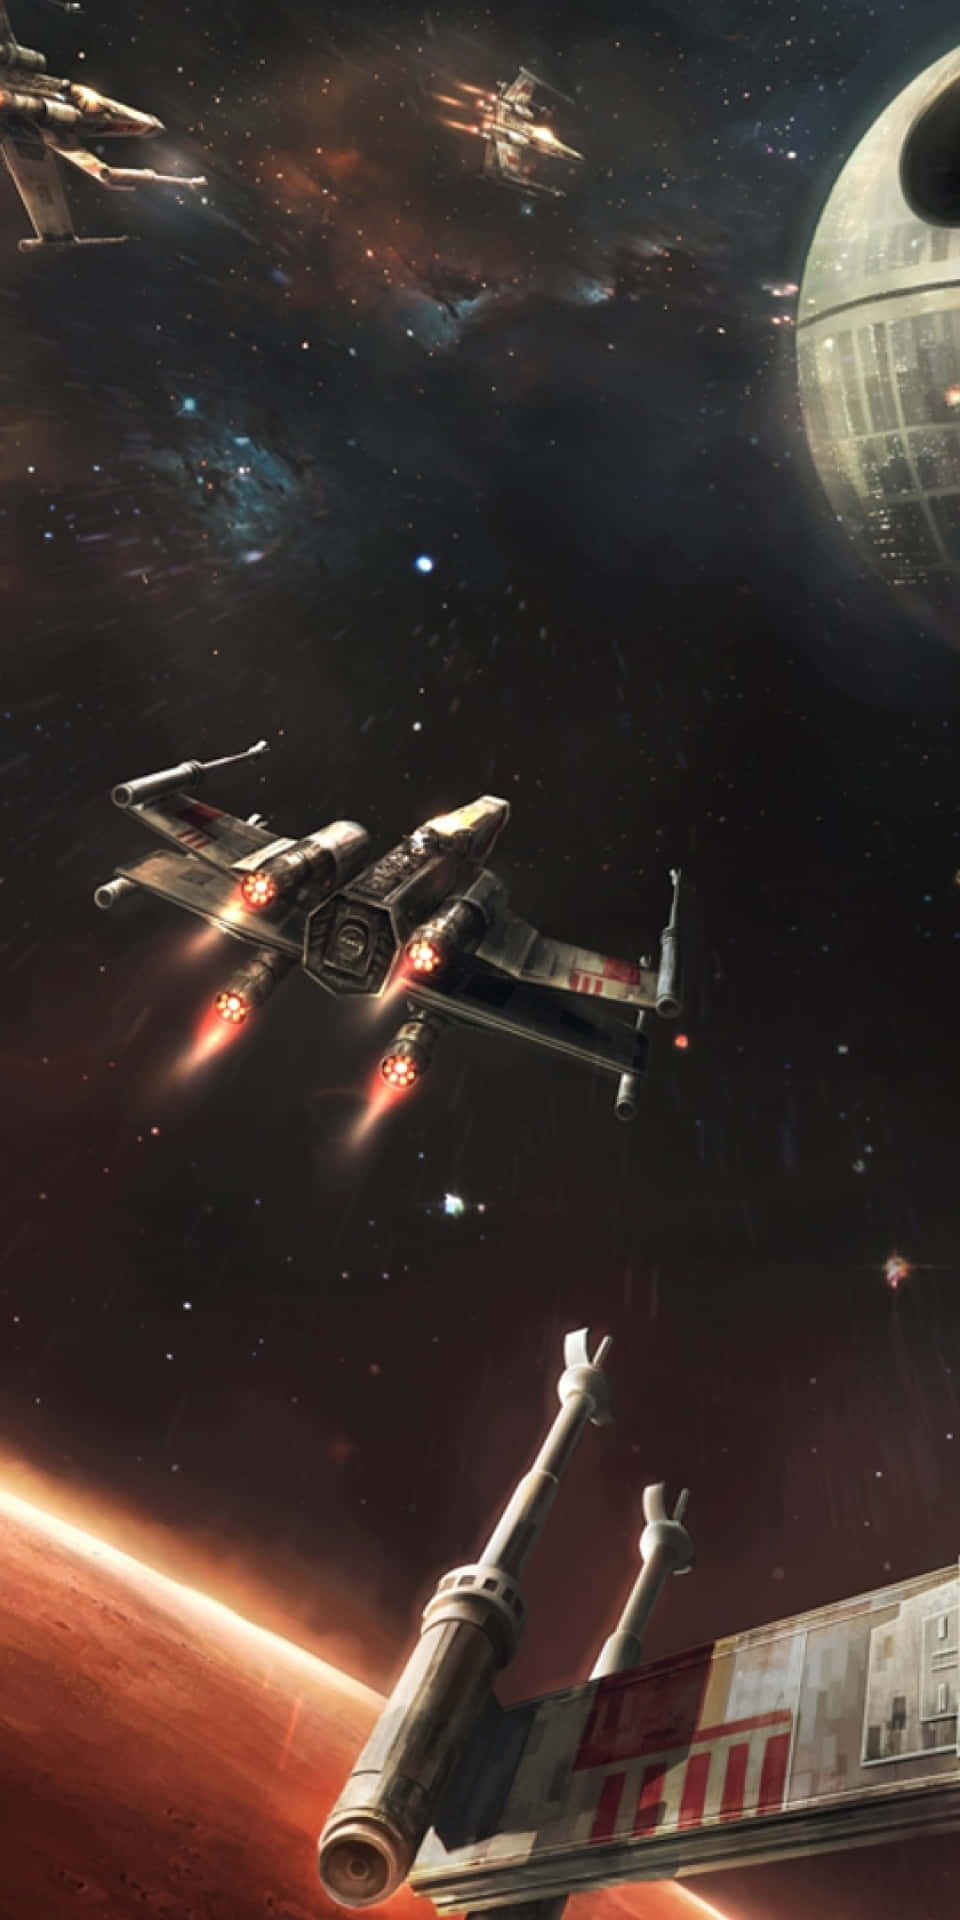 Take the skies in this Star Wars X-Wing Wallpaper